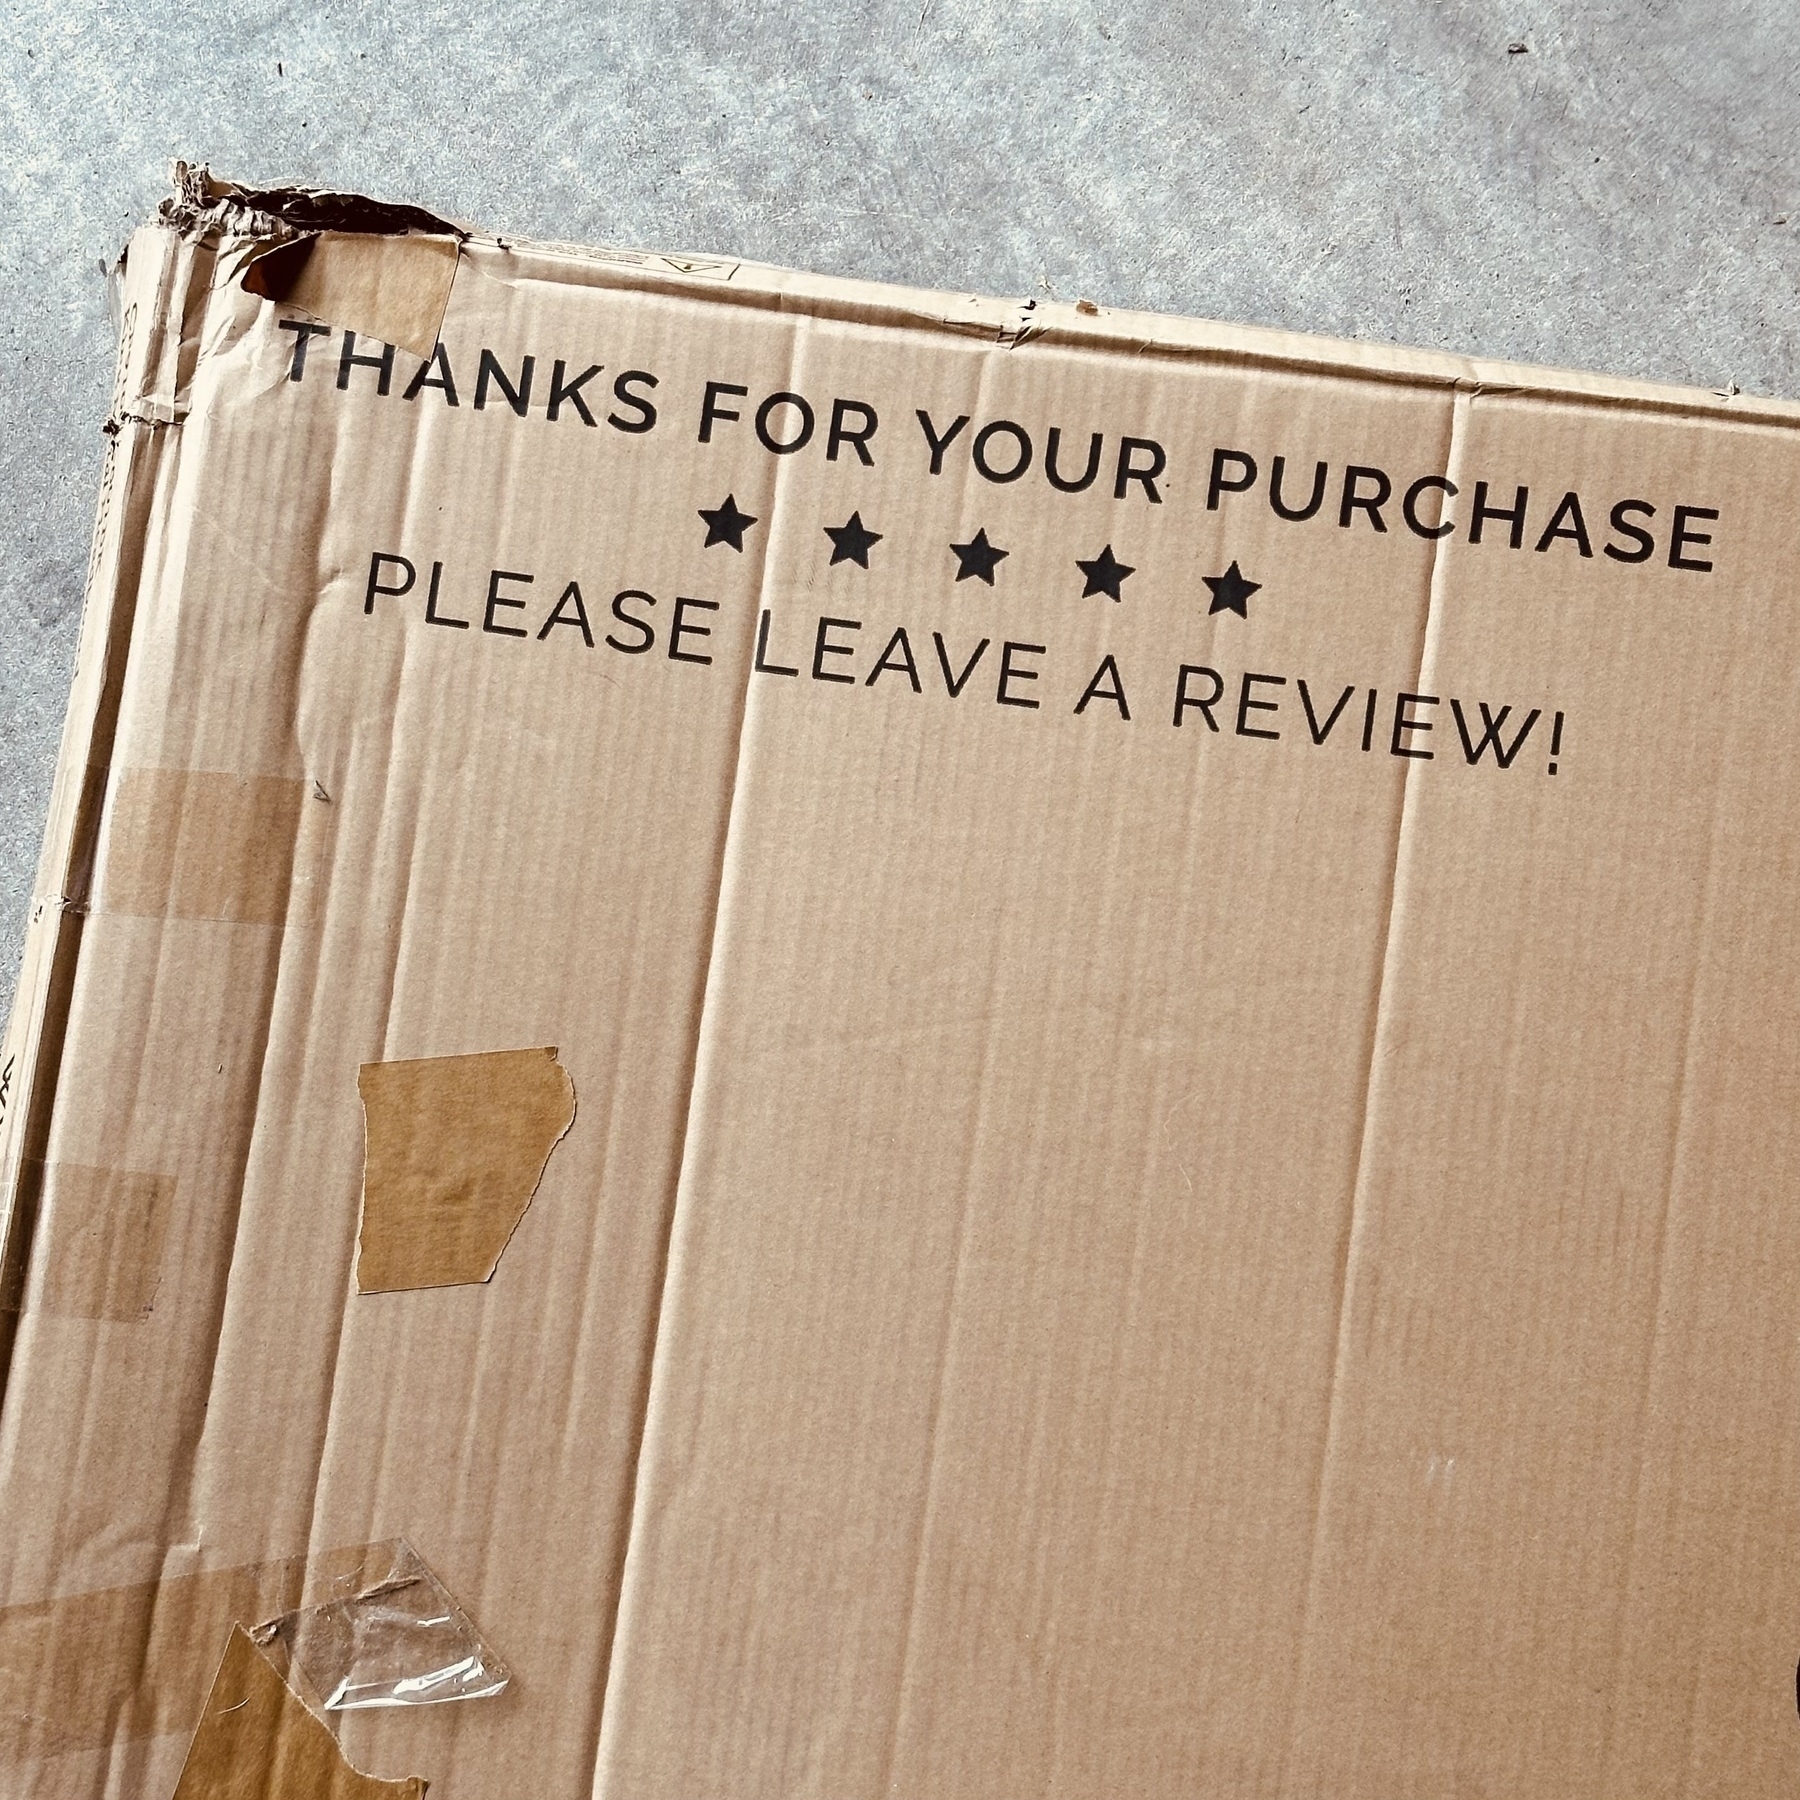 Cardboard box that says please leave a review.